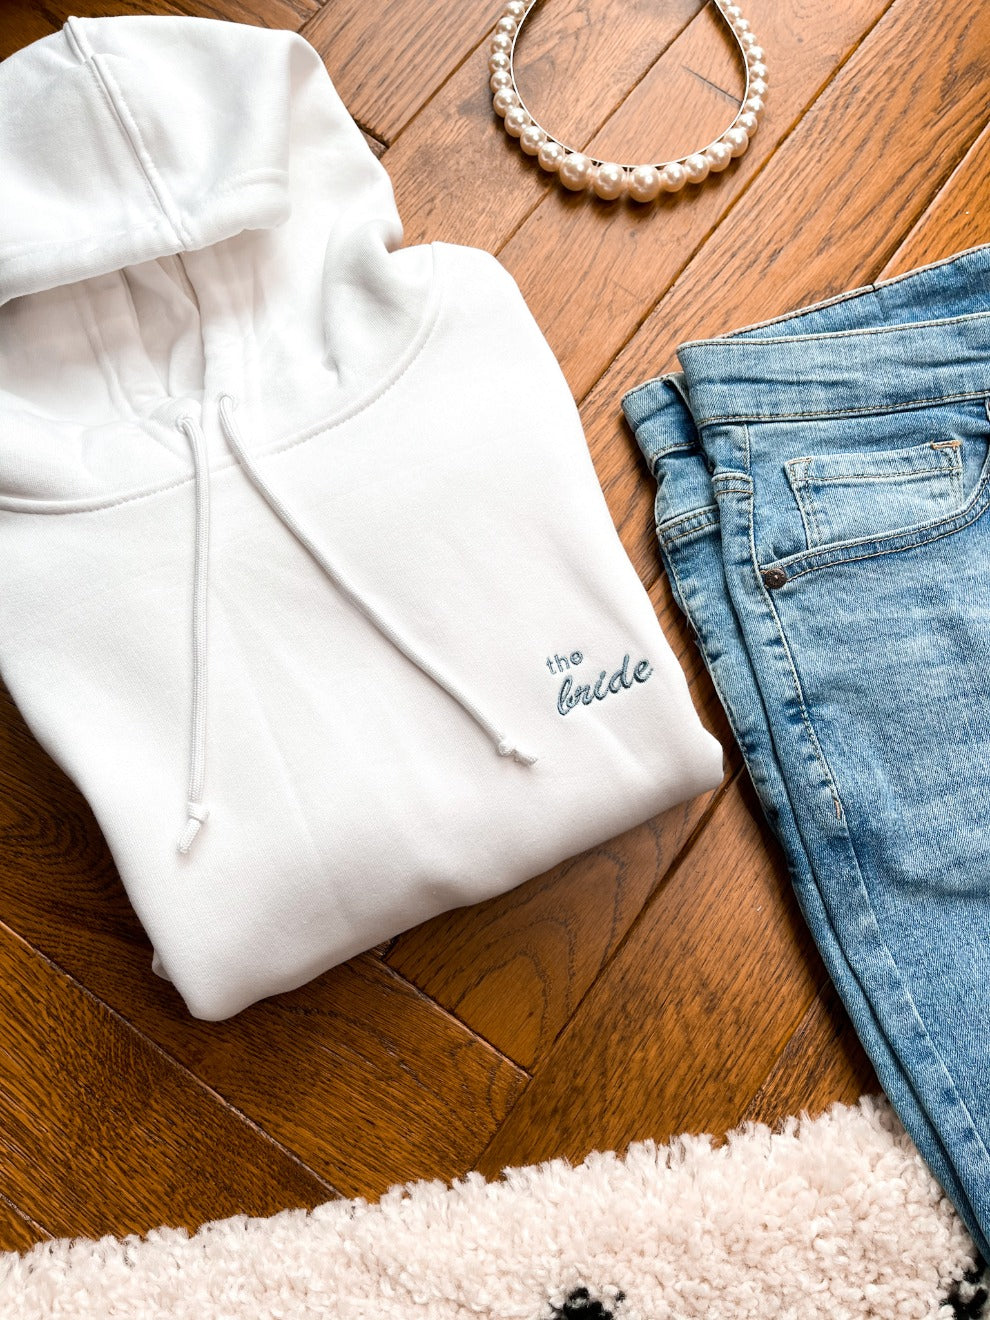 The Bride Personalised Embroidered Hoodie